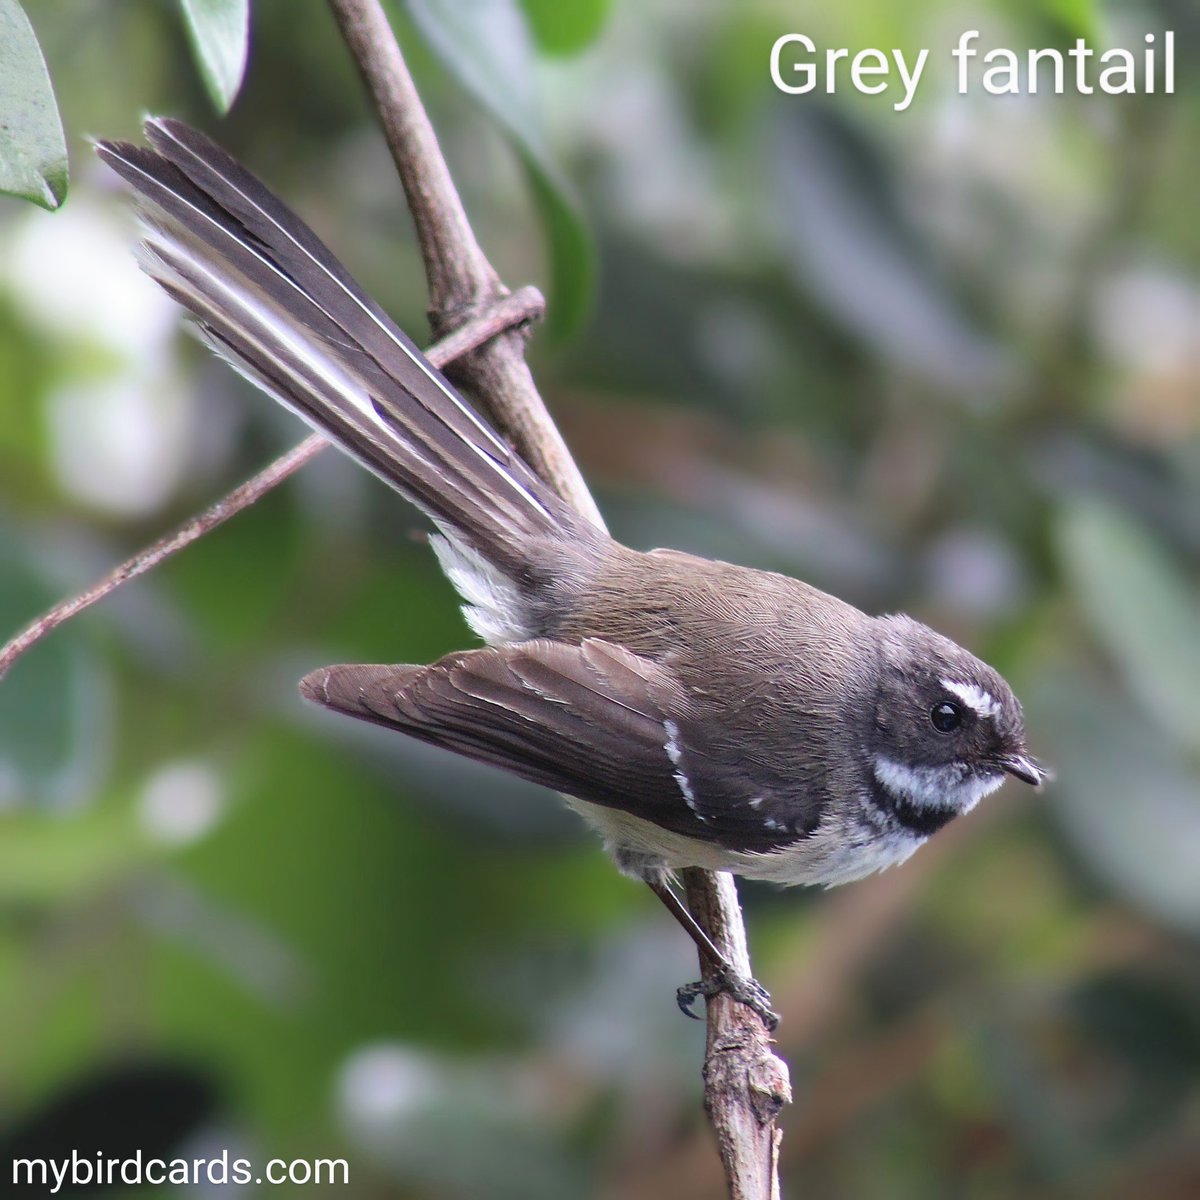 New addition! ➡️ Grey fantail 🌏 #Australasianbirds #Australianbirds | #mybirdcards #birdcards #birds🦜